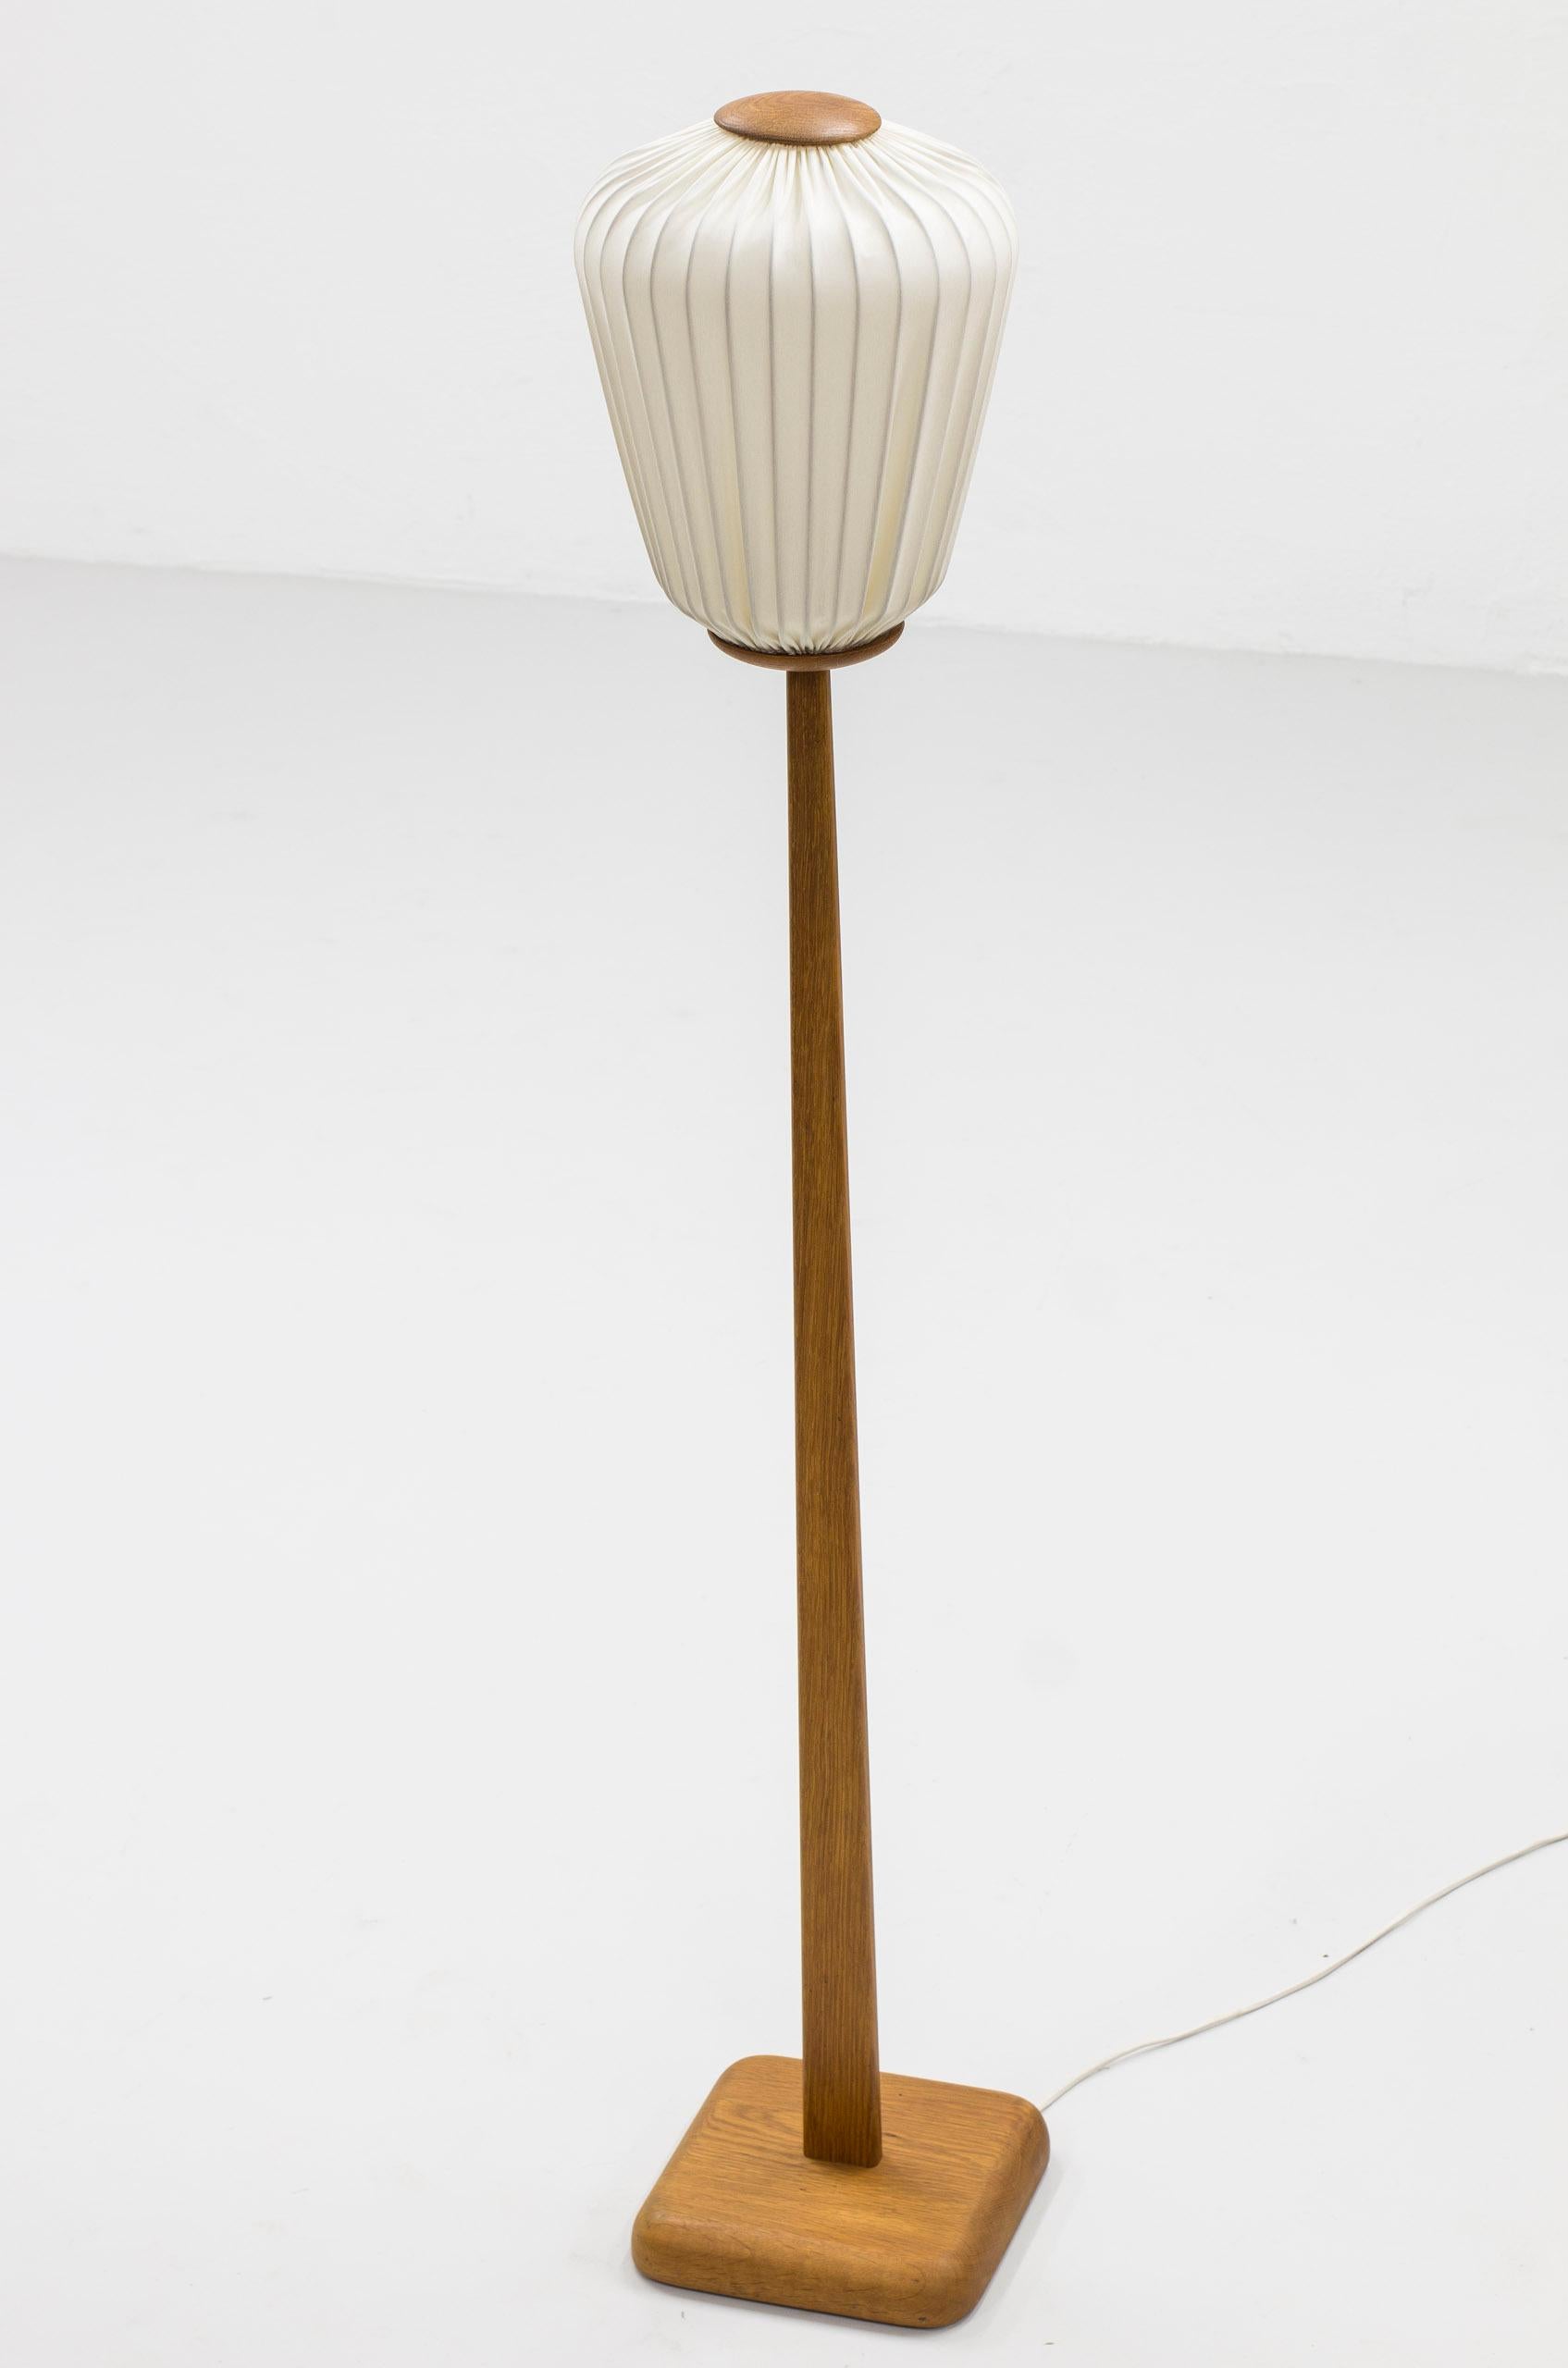 rare and early floor lamp designed by Uno & Östen Kristiansson. Produced in Sweden by Luxus during the 1950s. Made from solid oak with shade in creme colored cotton. the shade has been reupholstered, hand sewn in chintz fabric. Very good vintage